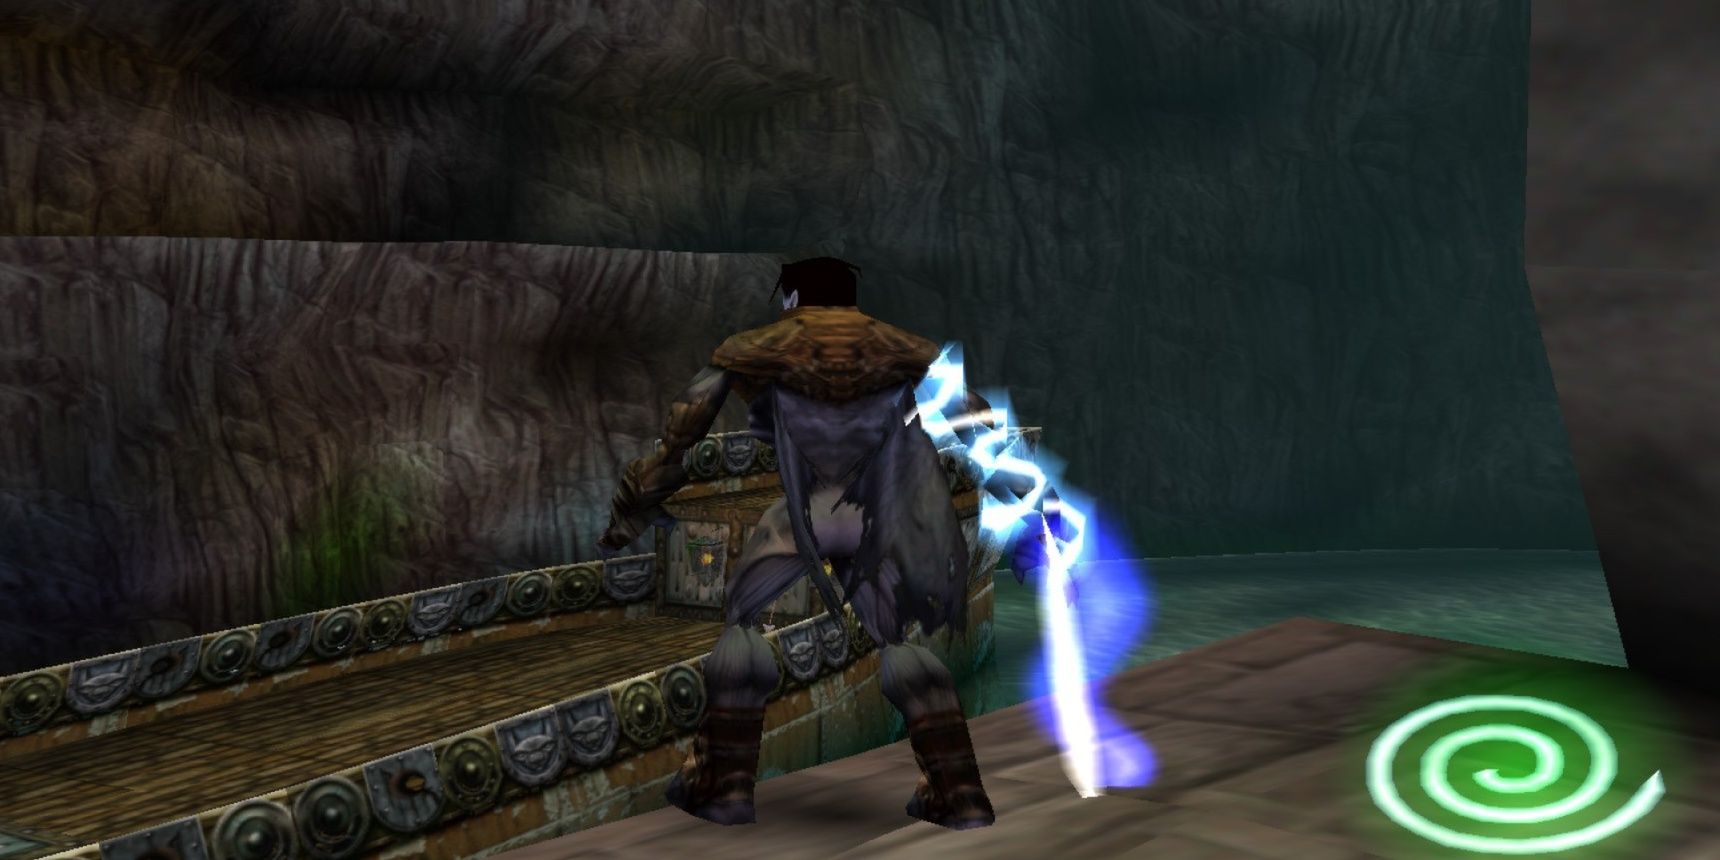 Raziel stands with energy enveloping his right arm looking at a row boat on a river